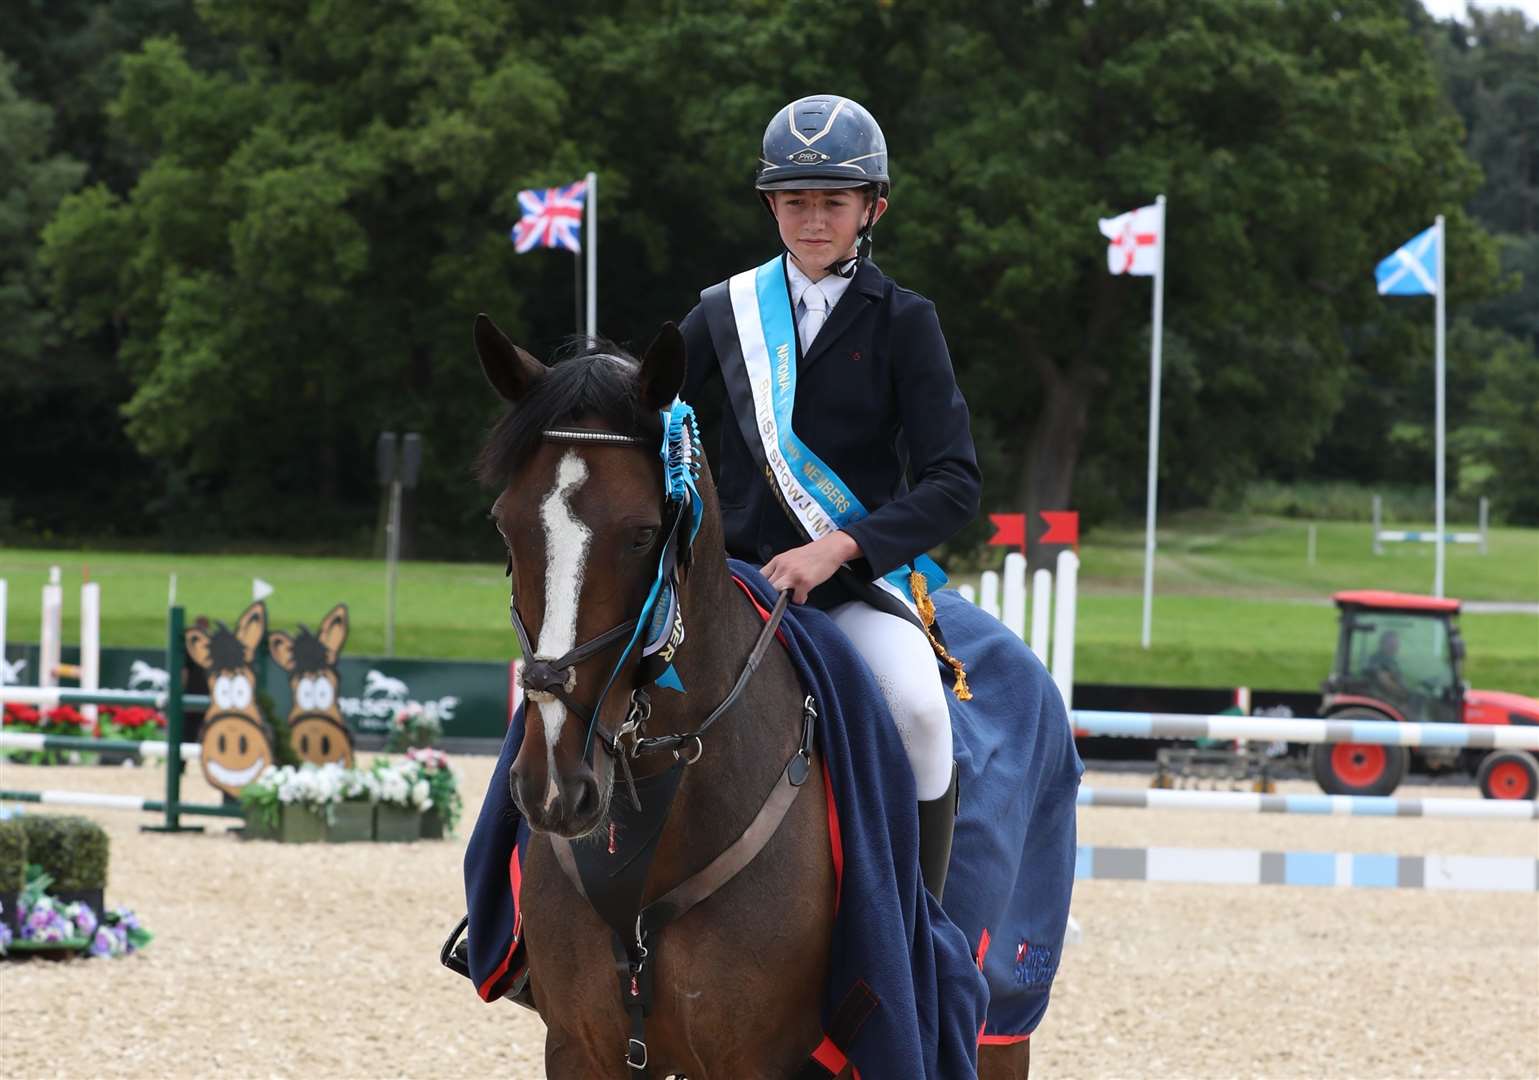 Alfie Miles win on Quantum Light at the at the NAF Five Star British Showjumping National Championships Picture: 1st Class Images (40066396)